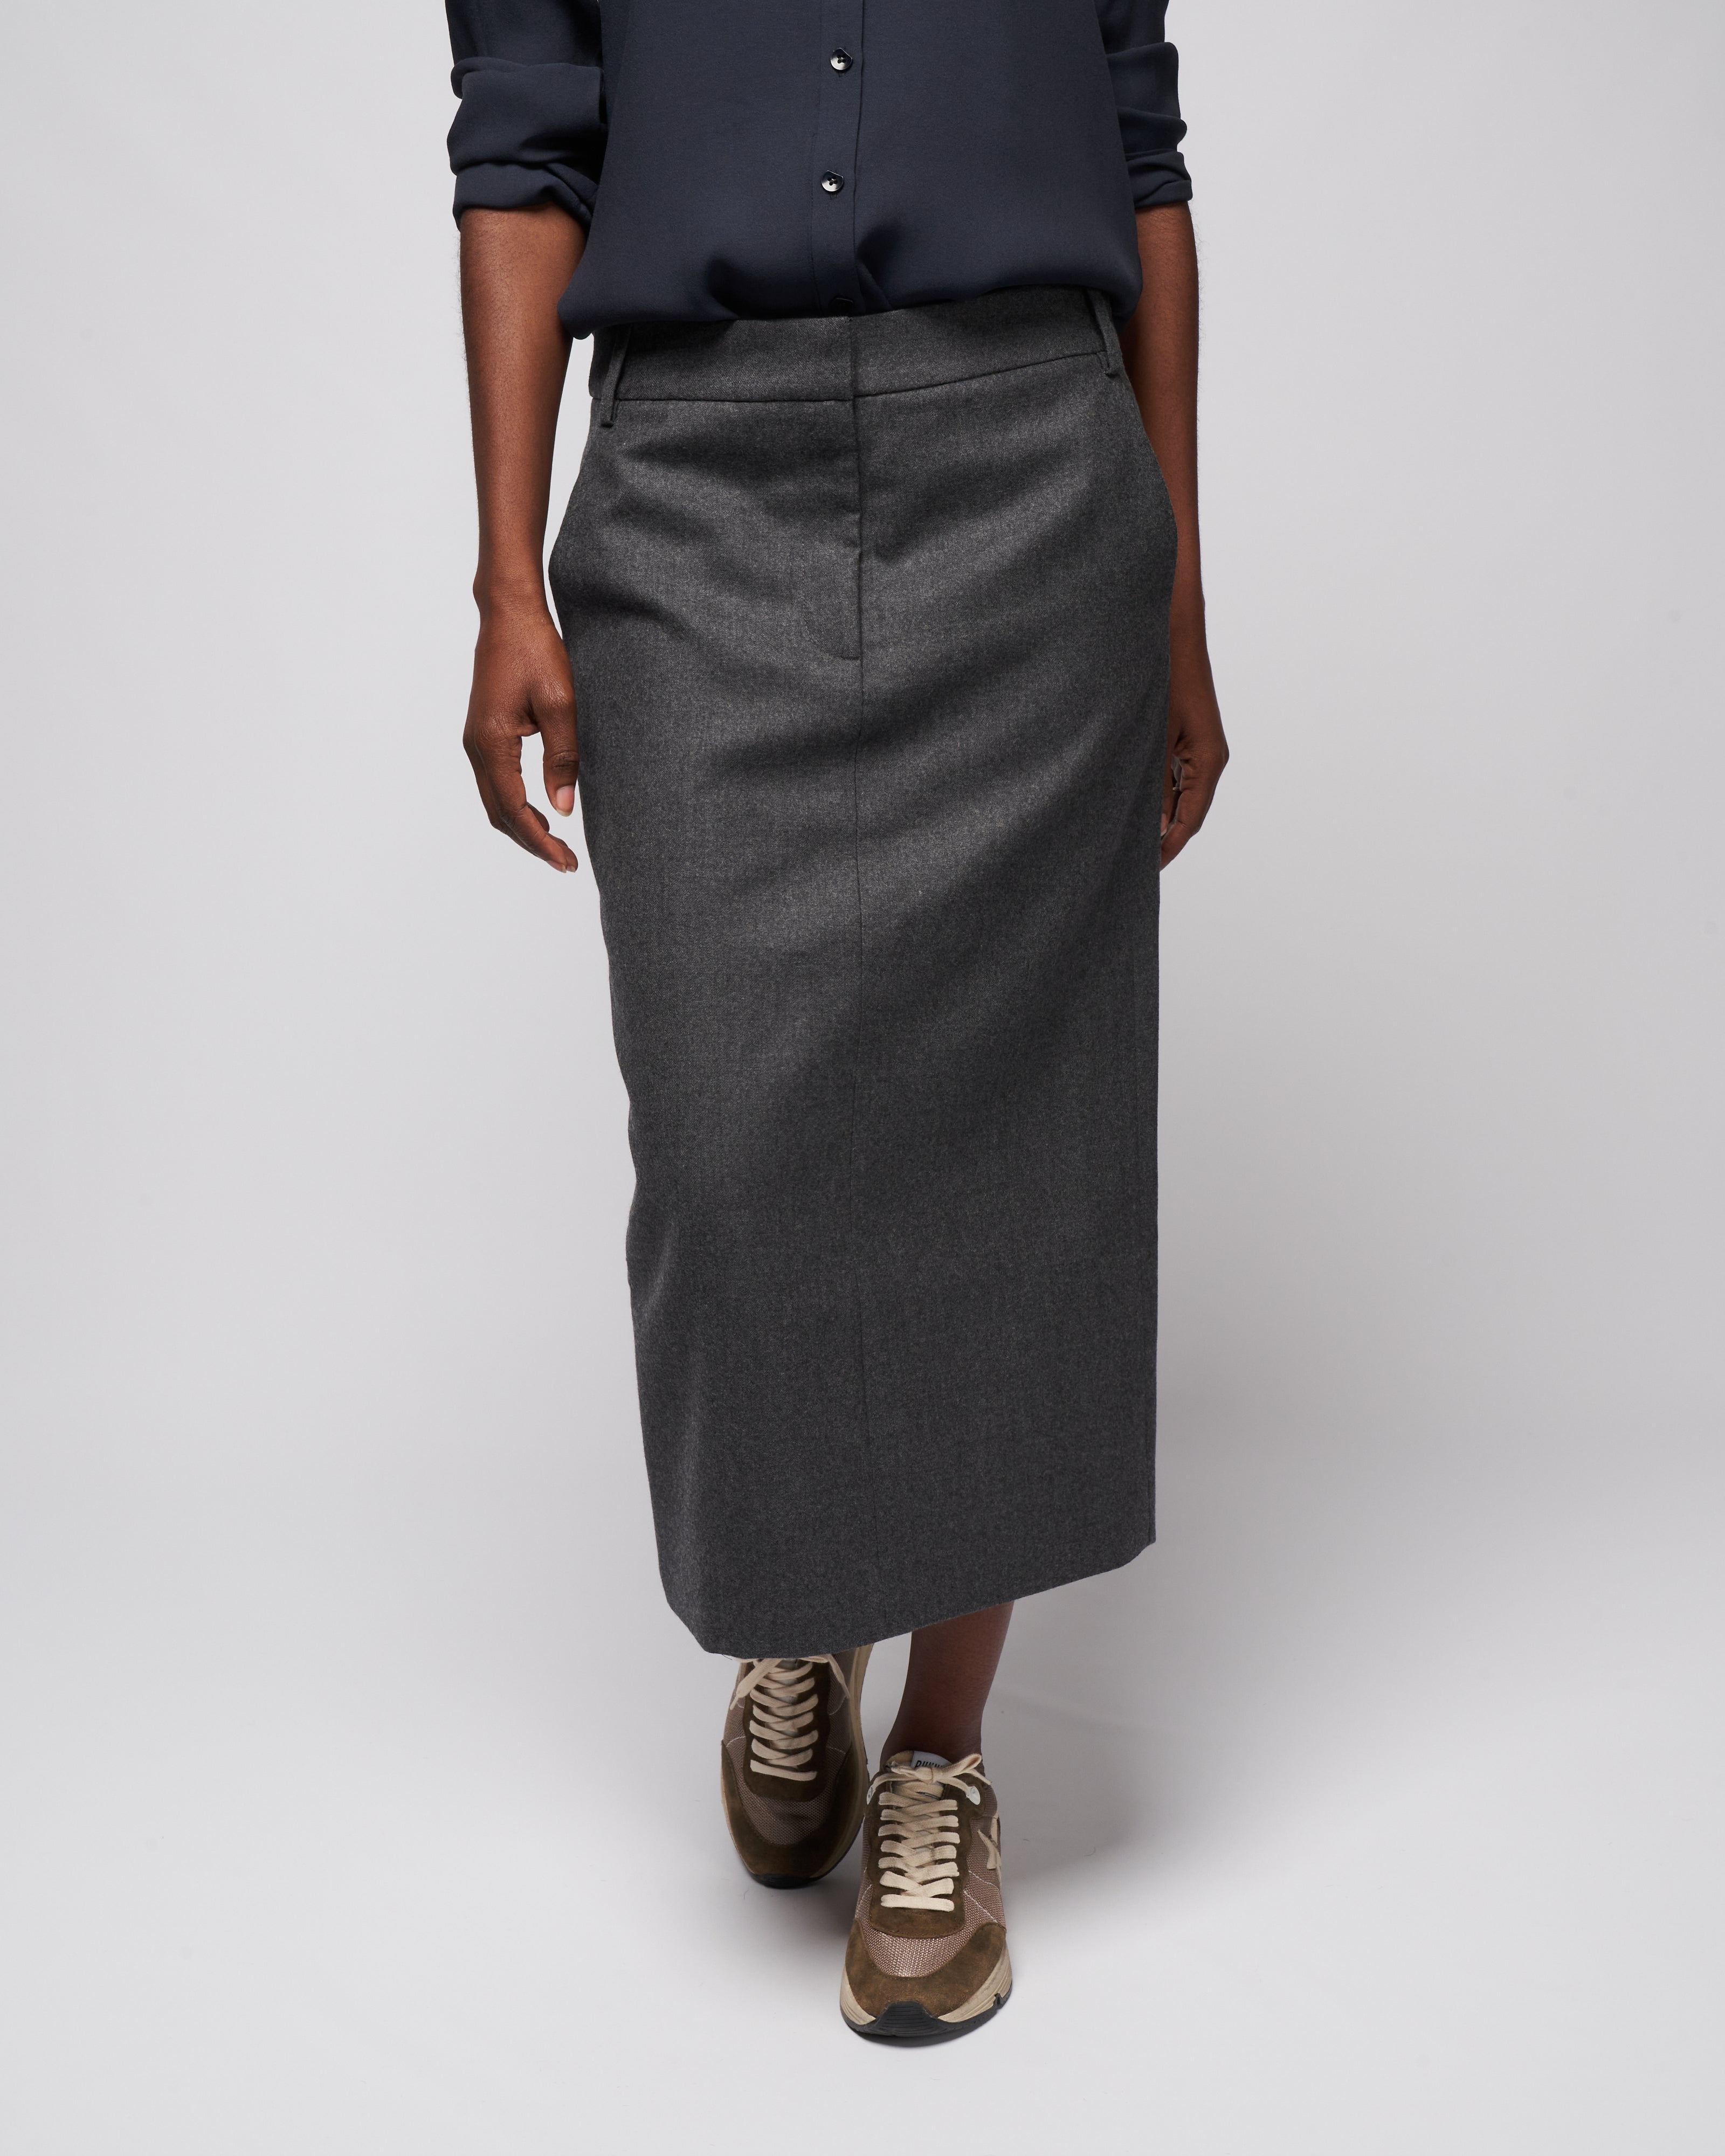 COS Short A-line Wool Skirt in Yellow | Lyst UK